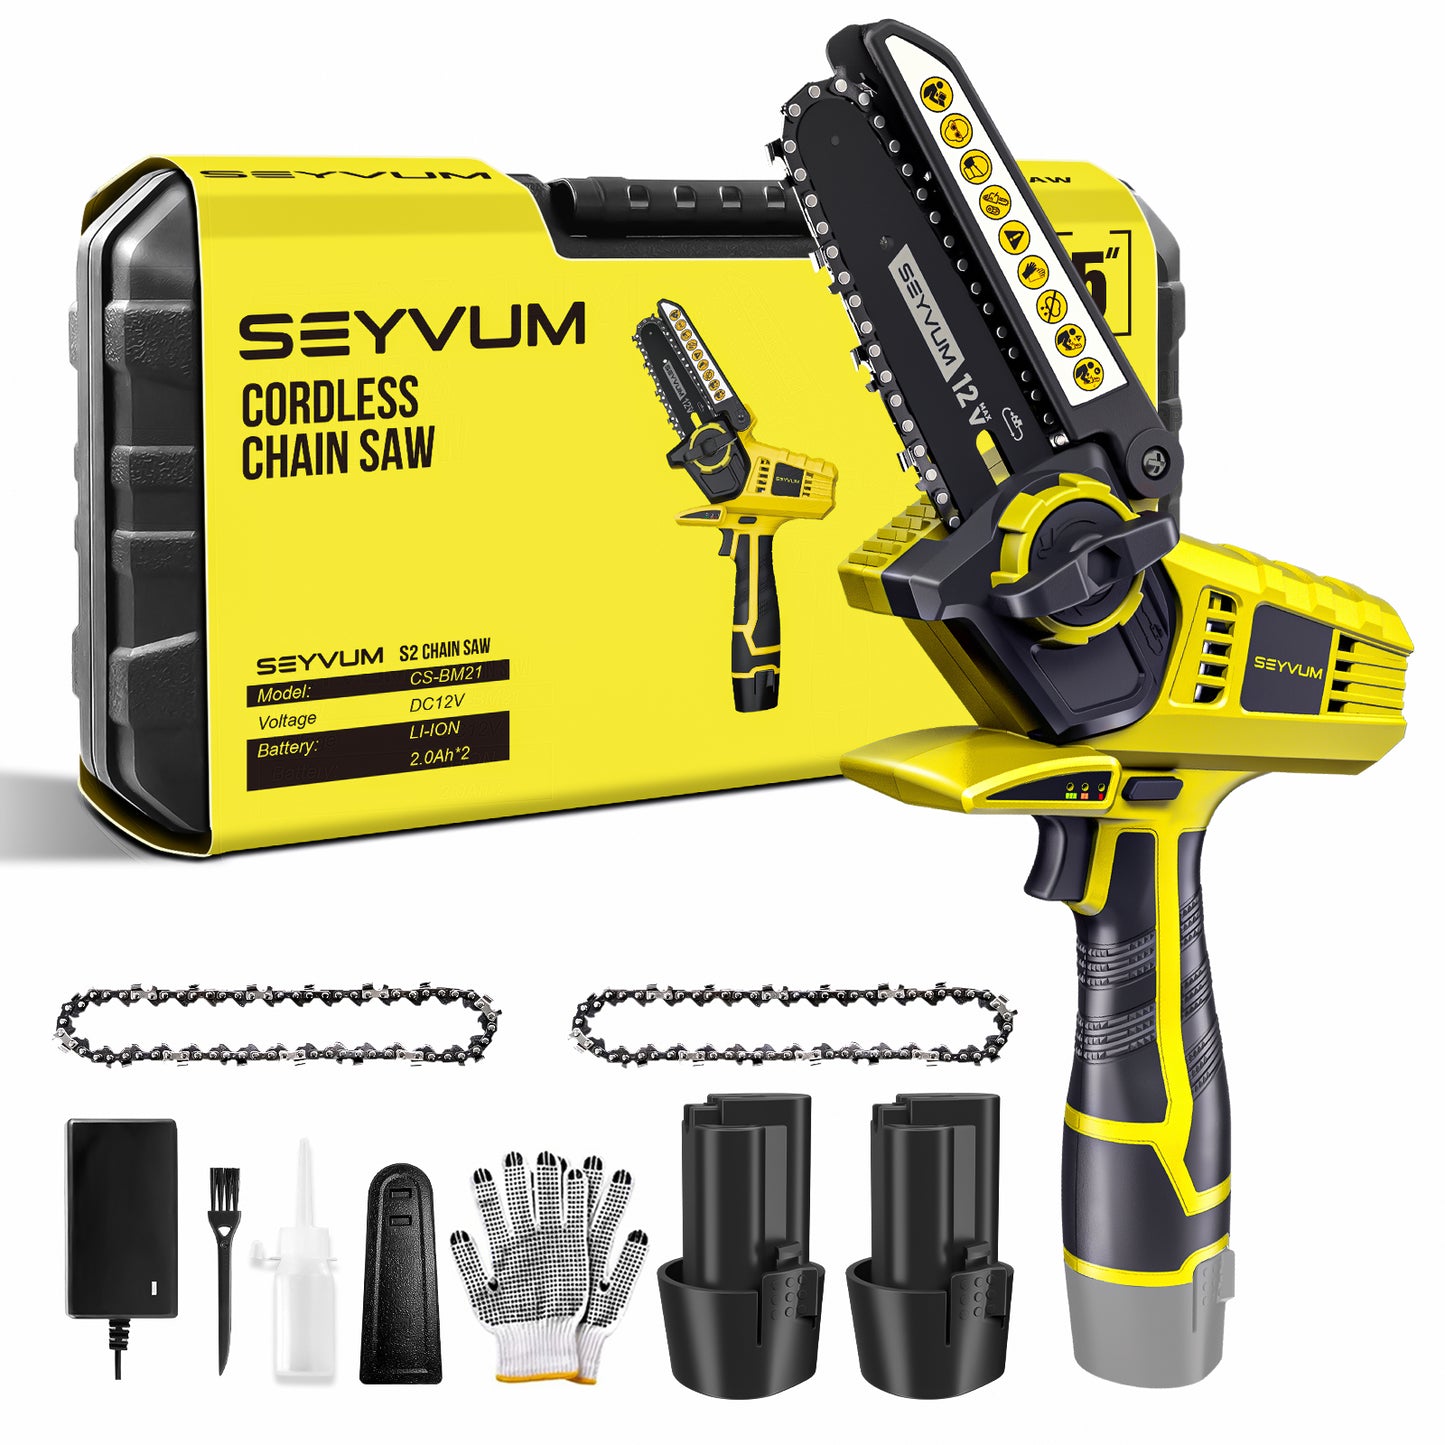 SEYVUM Mini Chainsaw 5-Inch with 2 Batteries 2 Chains,Yellow